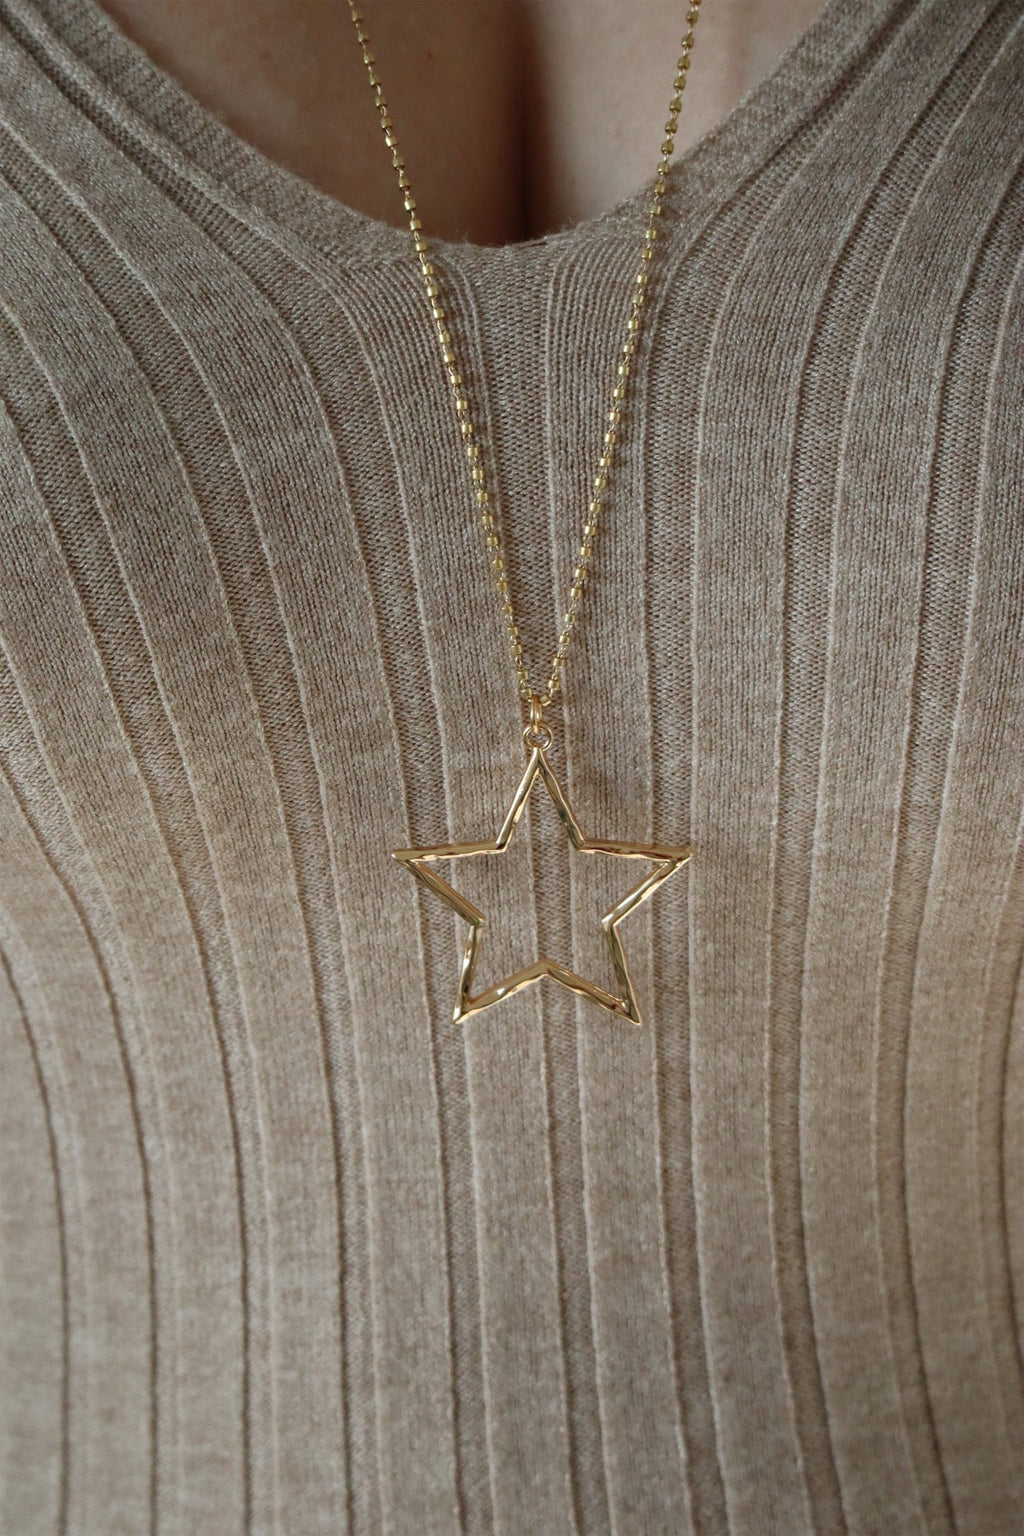 STARLEY’S STAR NECKLACE - GOLD